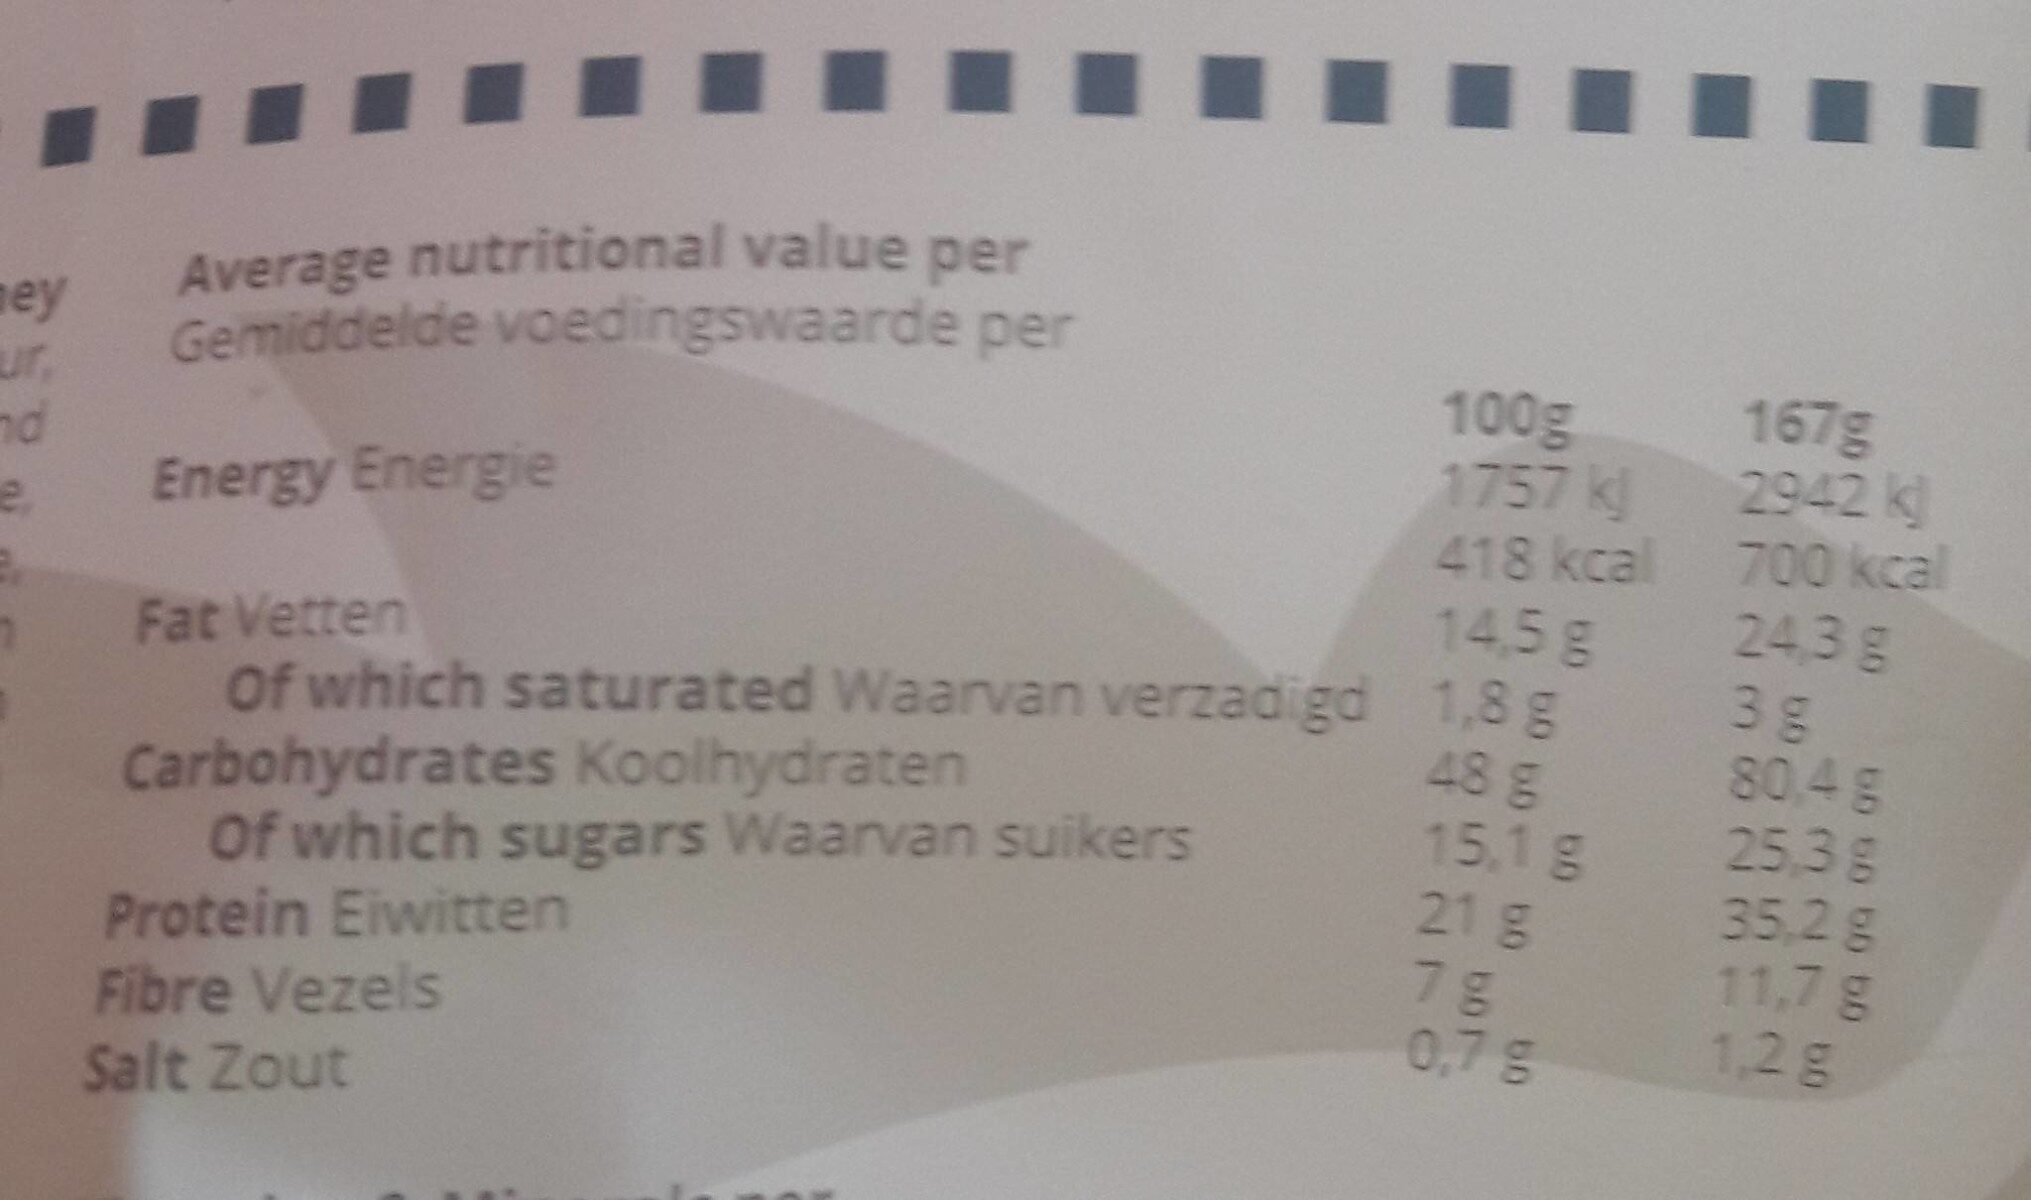 Super strawberry standard - Nutrition facts - fr